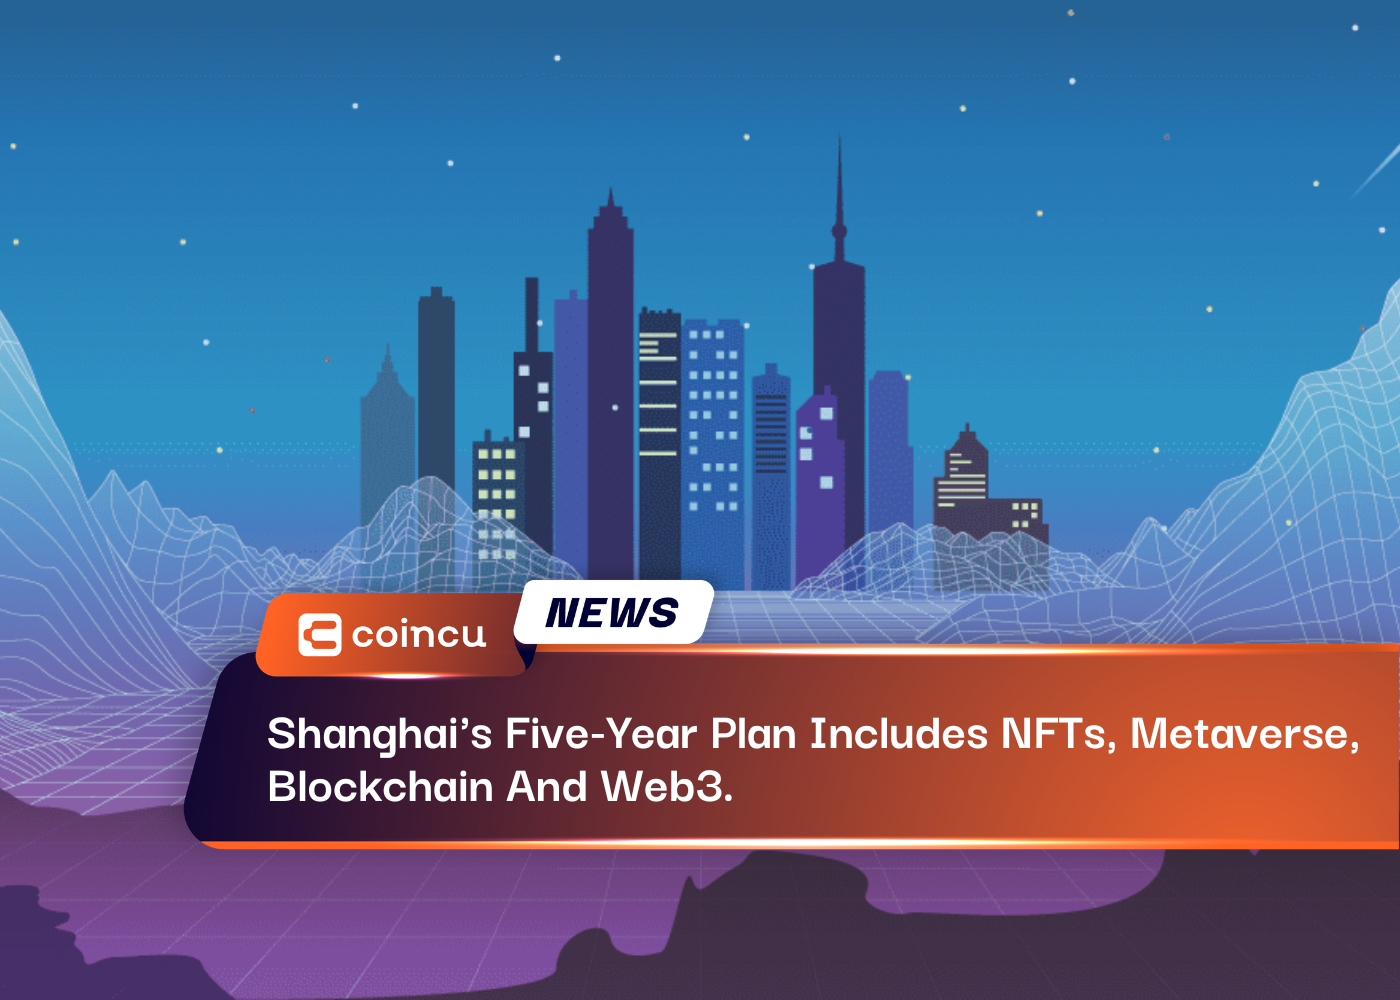 Shanghai's Five-Year Plan Includes NFTs, Metaverse, Blockchain And Web3.